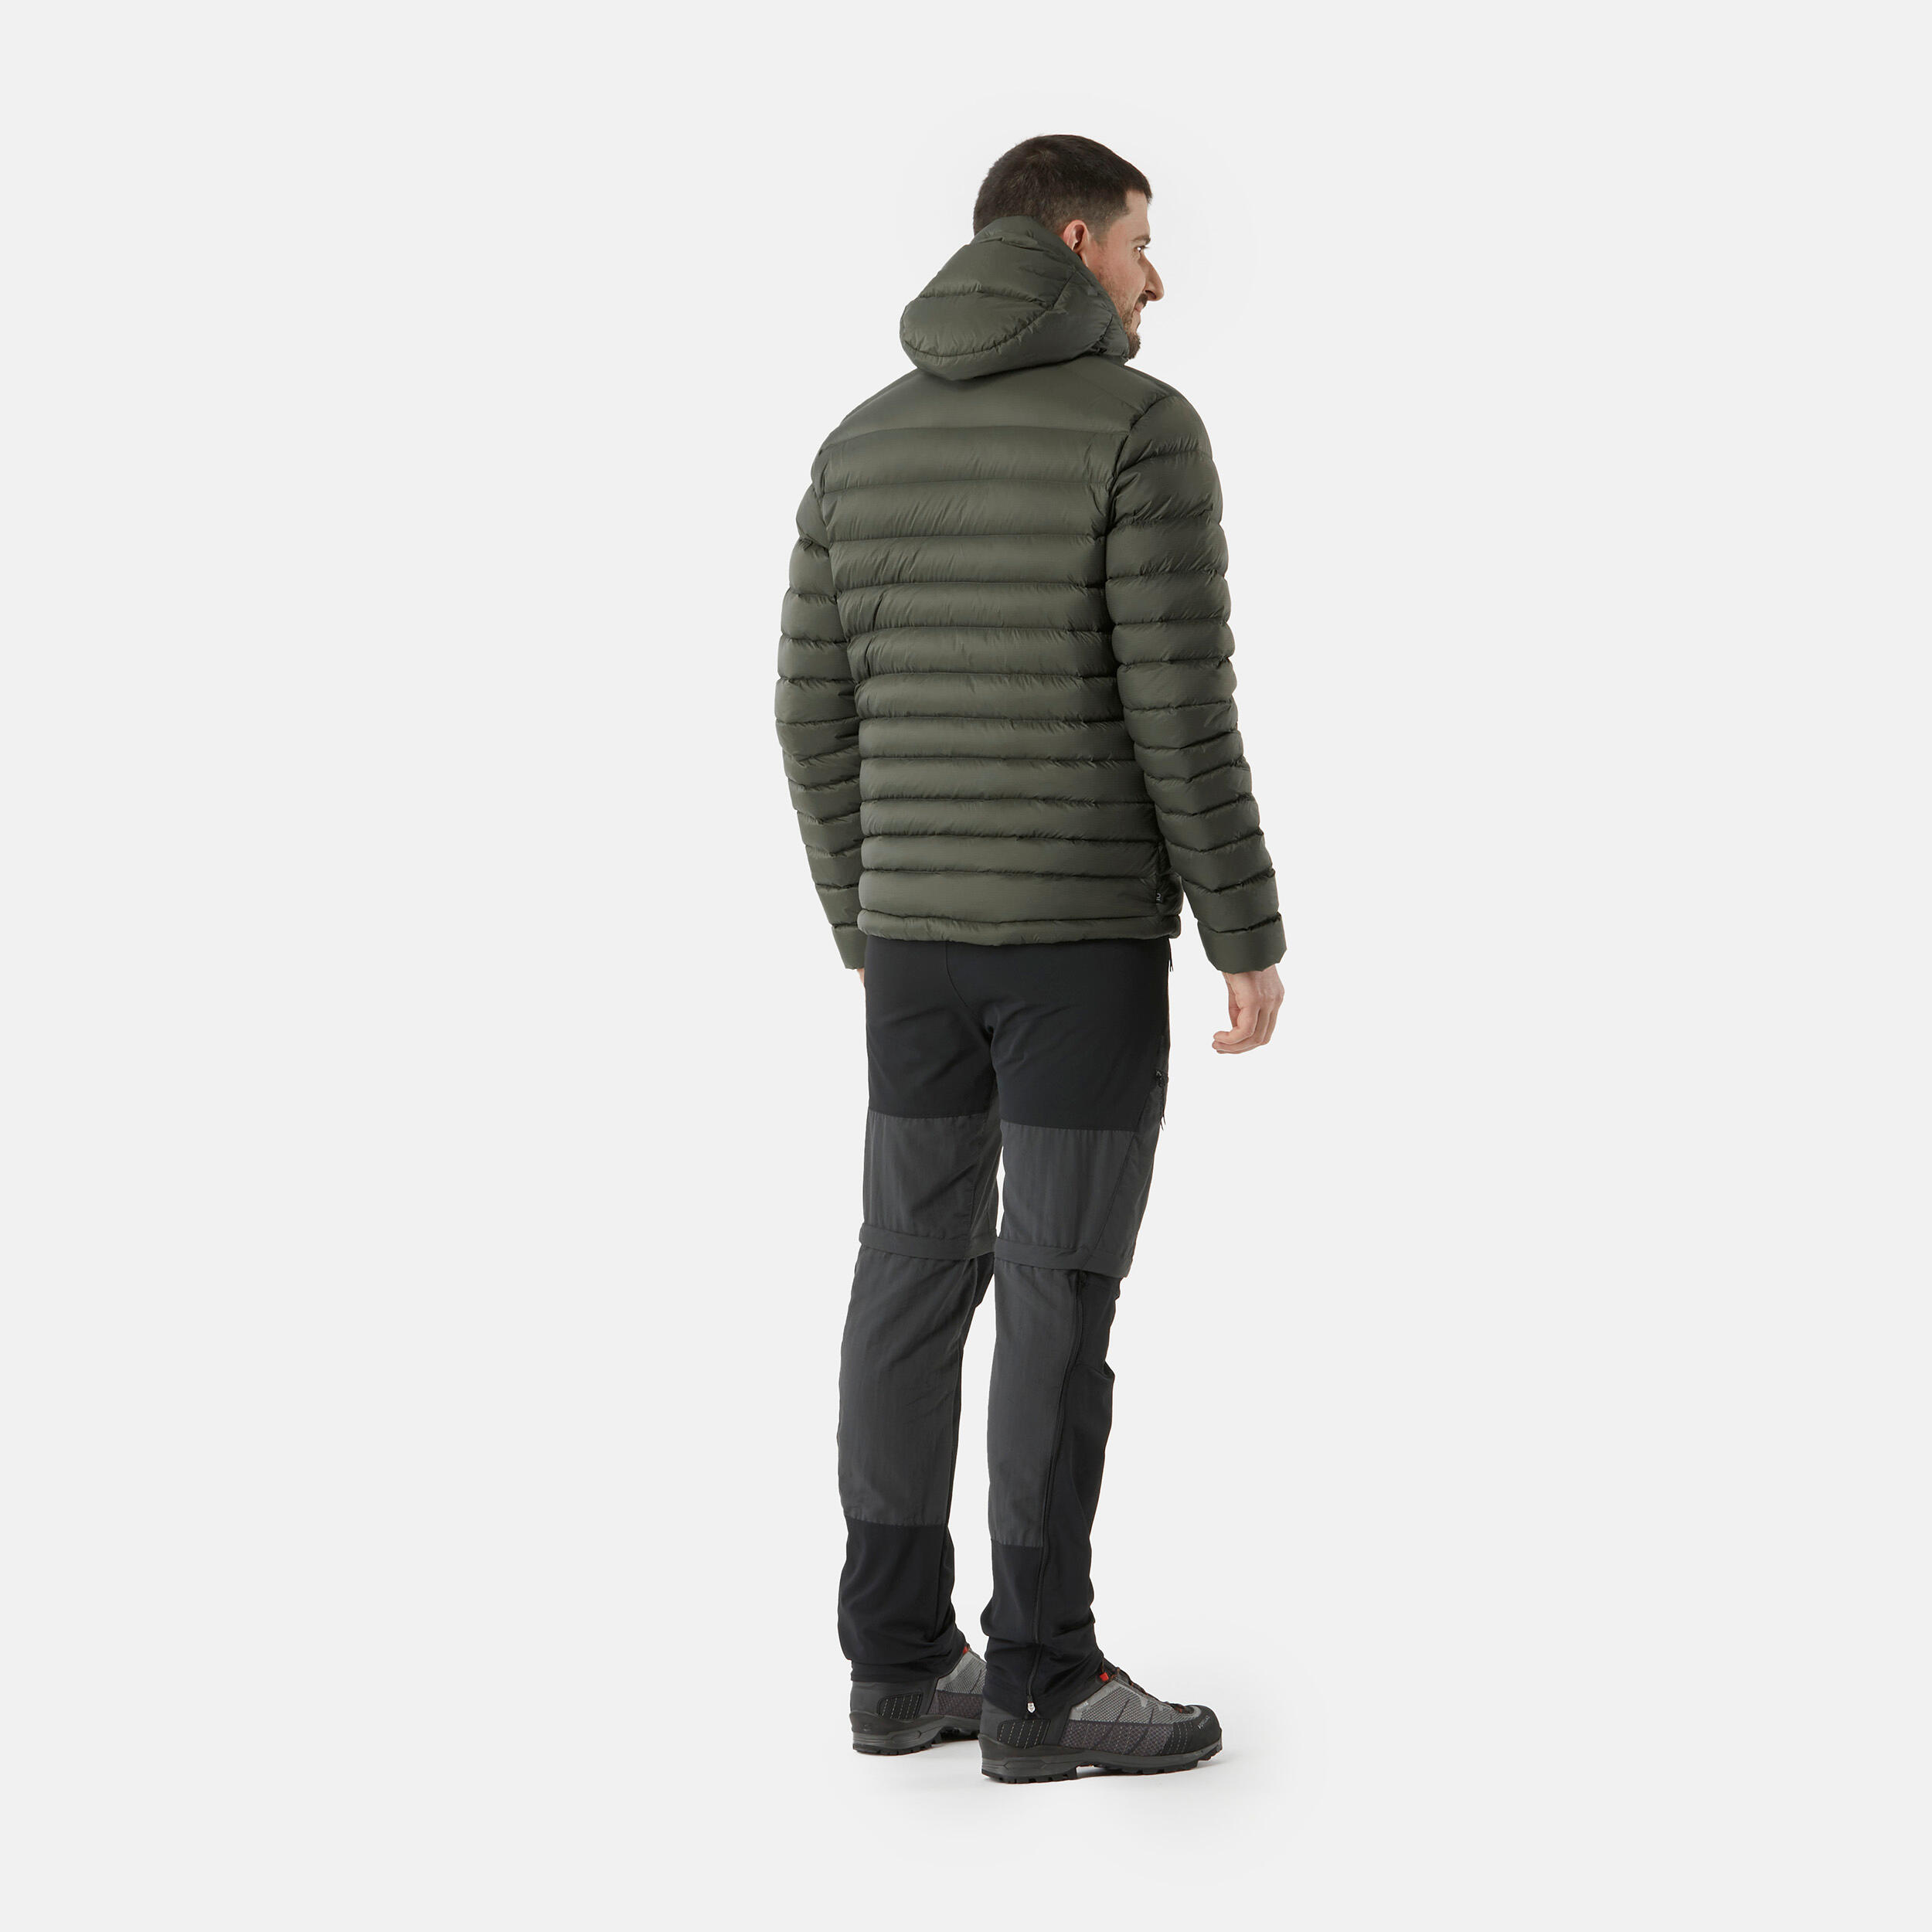 Decathlon Forclaz hooded puffer jacket vs Arcteryx Cerium hoody: which is  best for you?